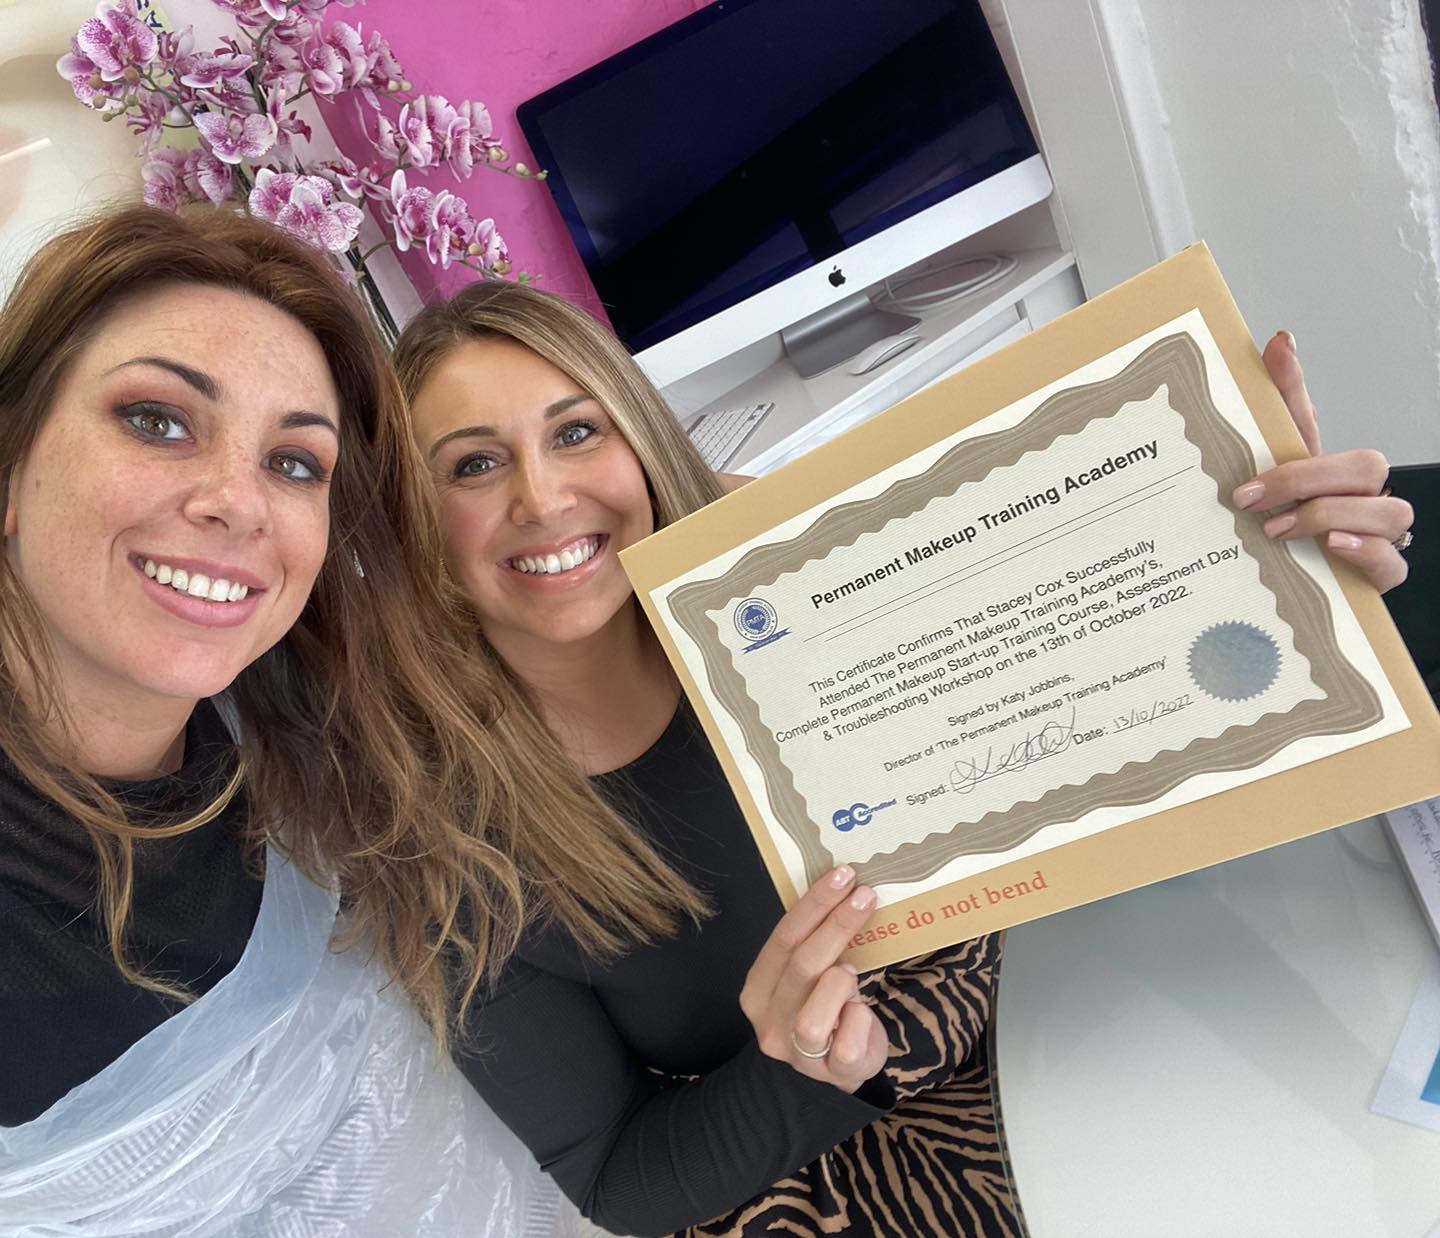 Stacey getting her Permanent Makeup Training Certificate From Katy Jobbins